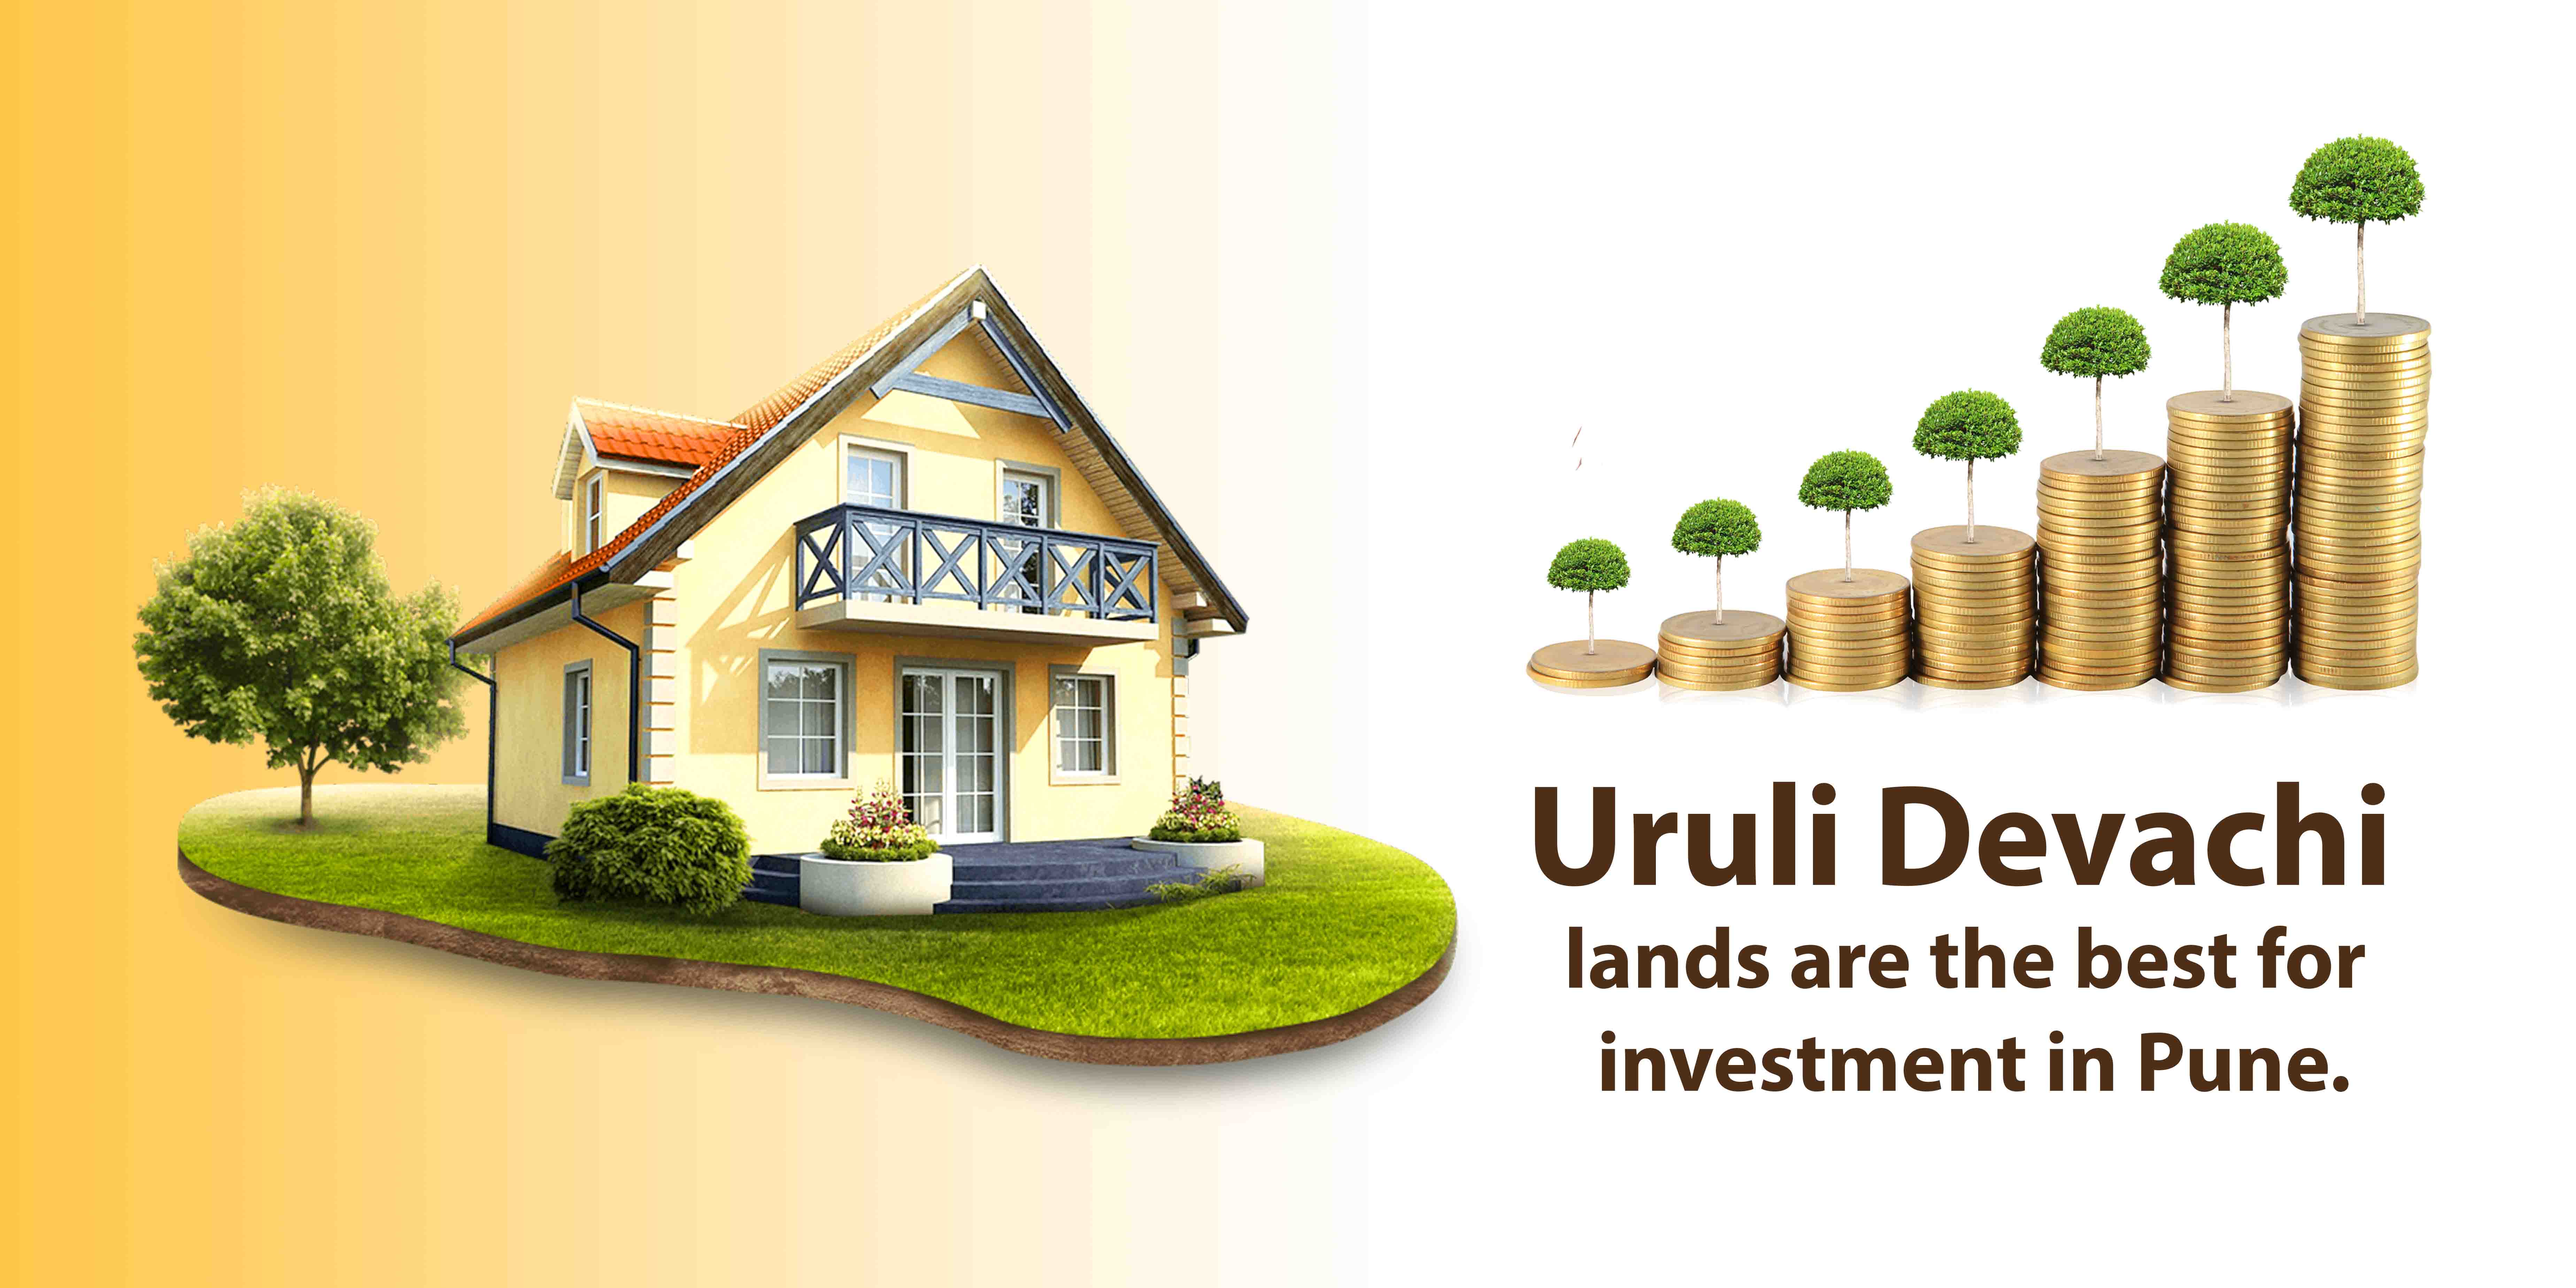 Uruli Devachi lands are the best for investment in Pune.